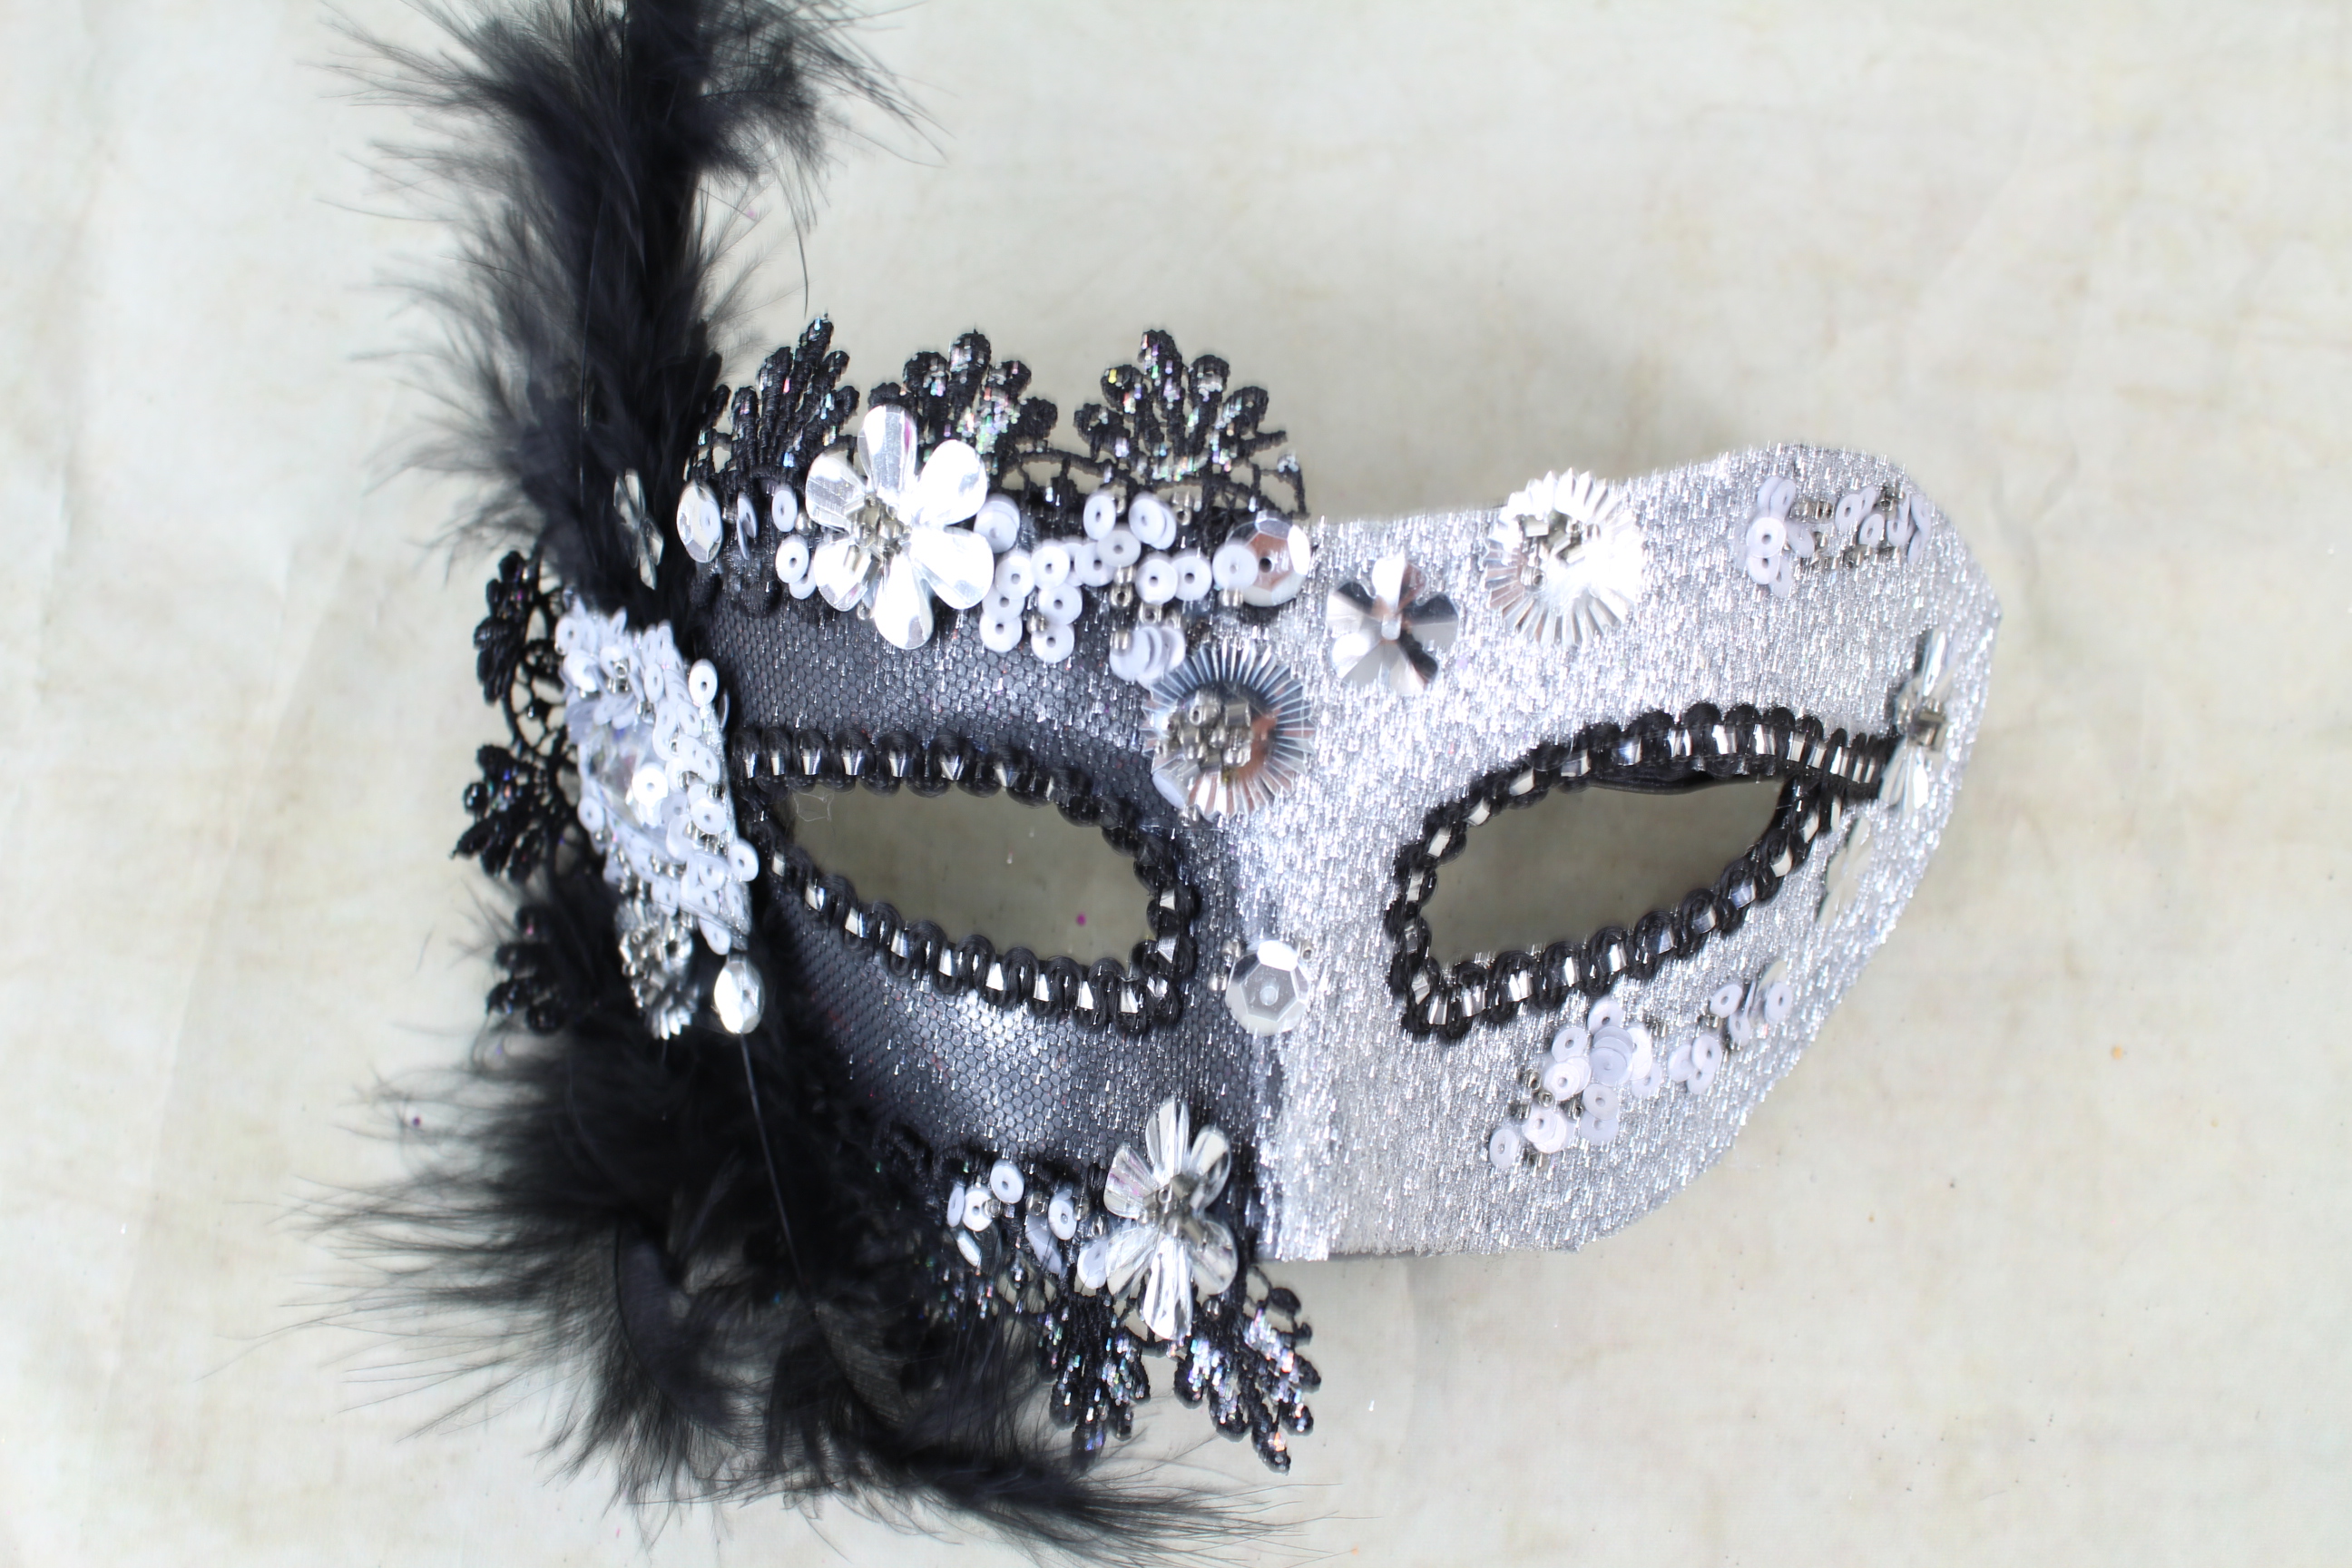 3 x two Tone Mask With Gems And Coque Feathers - BUY 3 FOR THE PRICE OF 2!